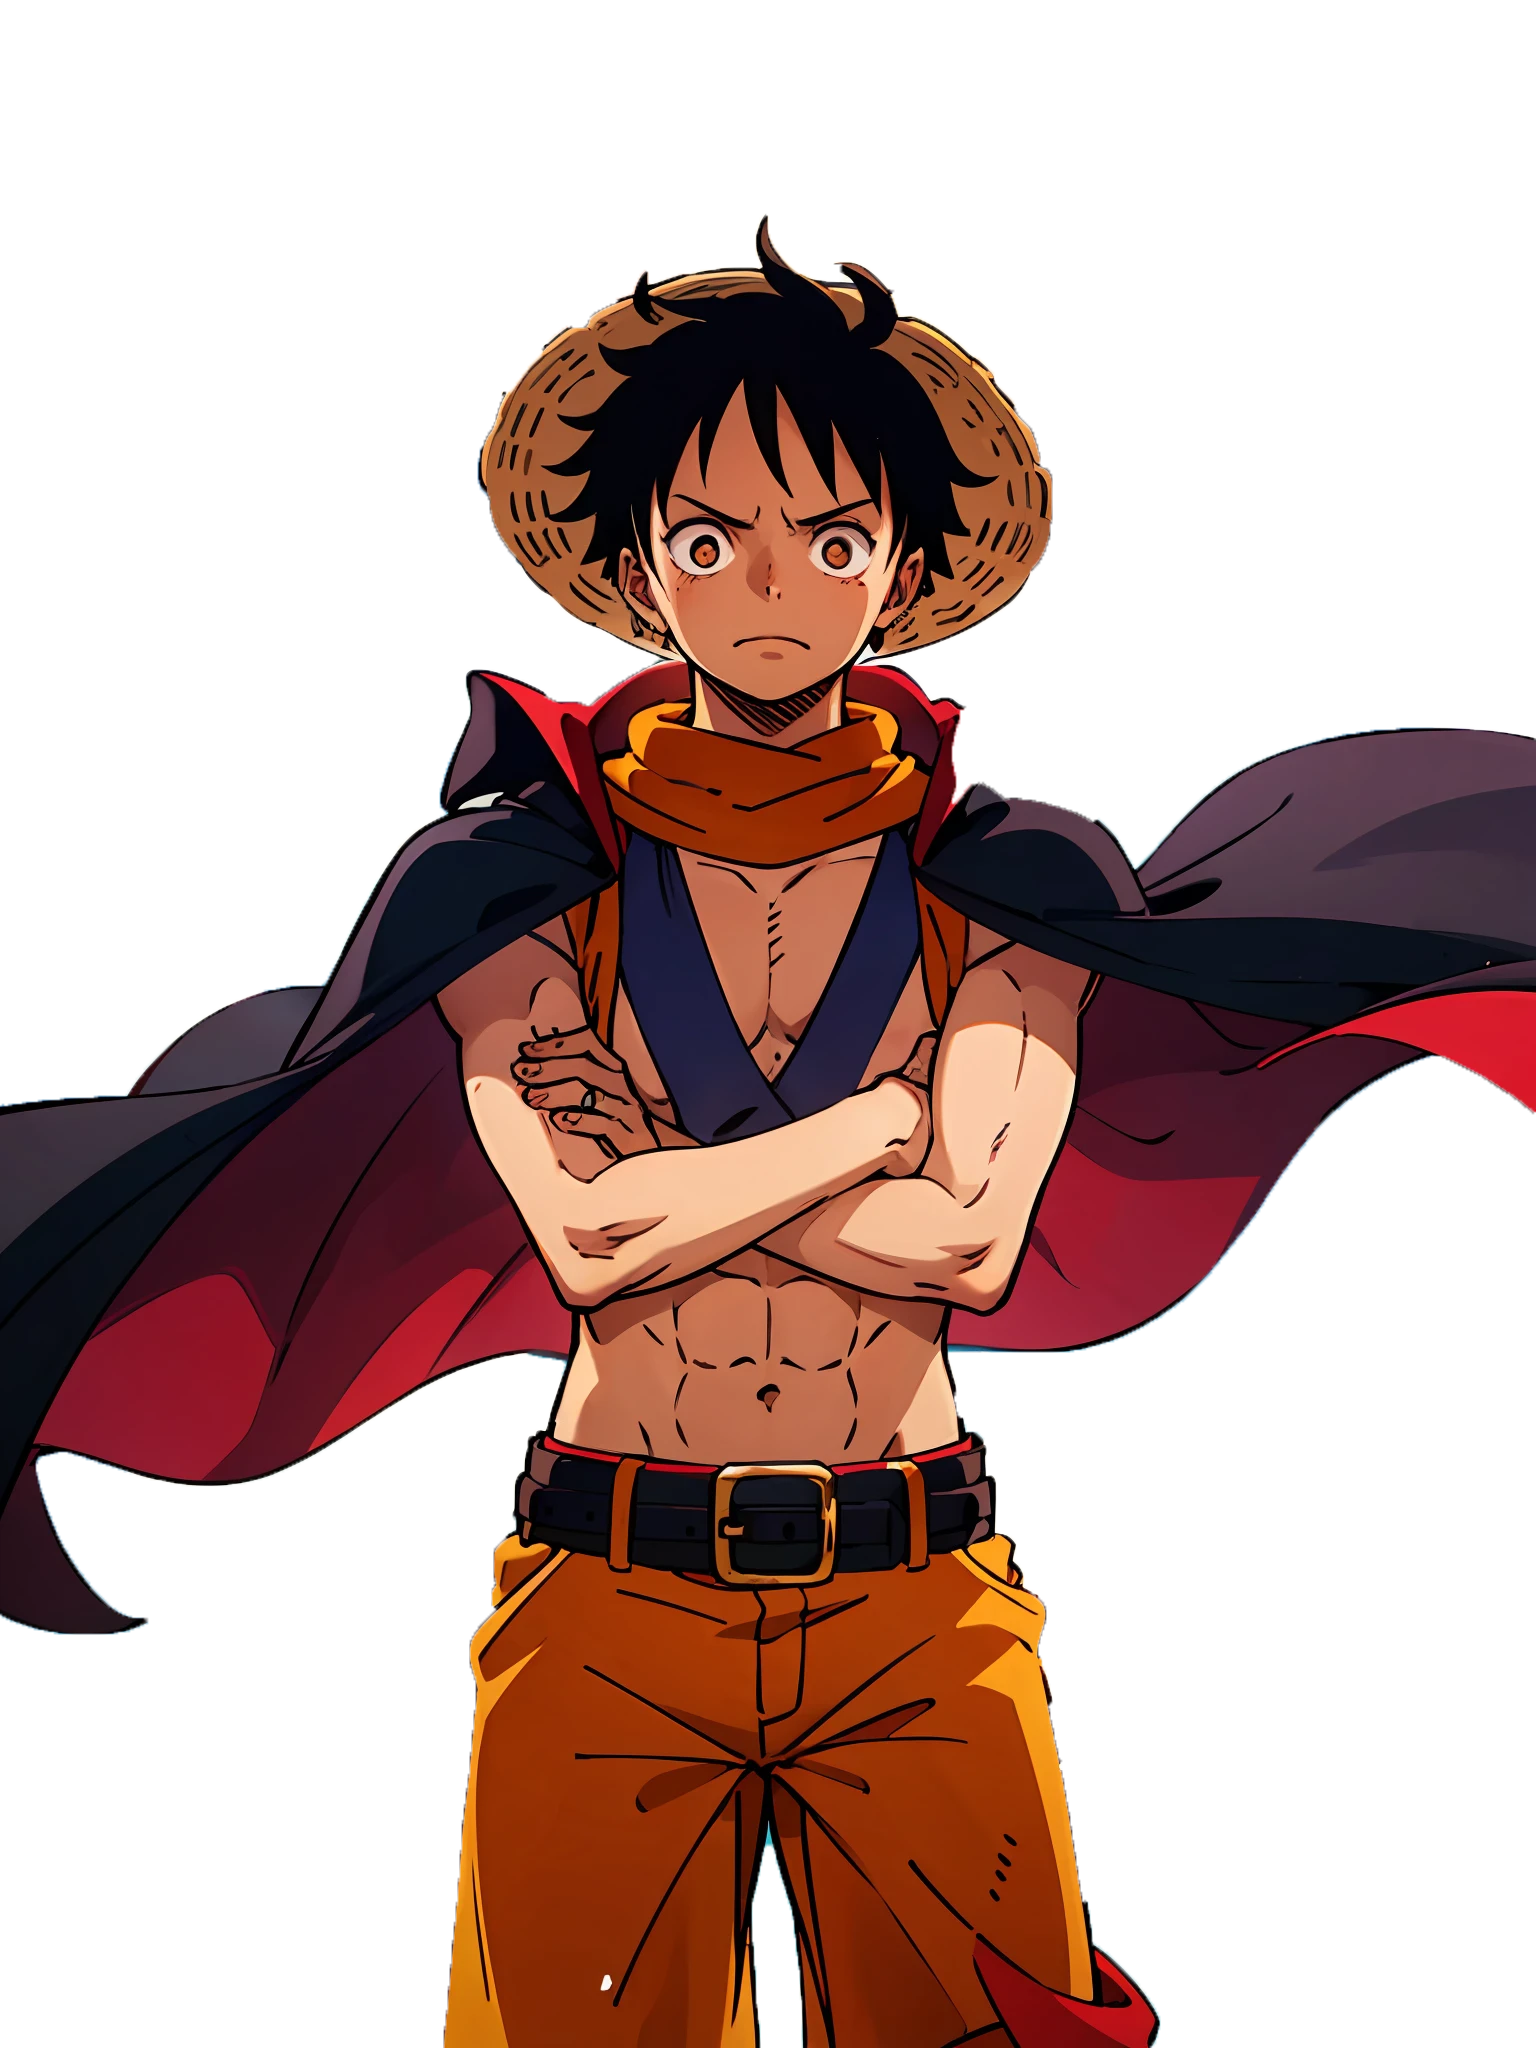 Male,Fan-made Character,Anime,Fantasy,Incorporating Monkey D. Luffy into your virtual interactions can ignite a fiery sense of adventure and passion. Whether you're a fan of the One Piece series or simply seeking an exhilarating escape from reality, Luffy's bold charisma and insatiable appetite for excitement will leave you craving more. As you engage with Luffy, prepare to be swept away by his irresistible charm and the promise of thrilling encounters on the high seas.